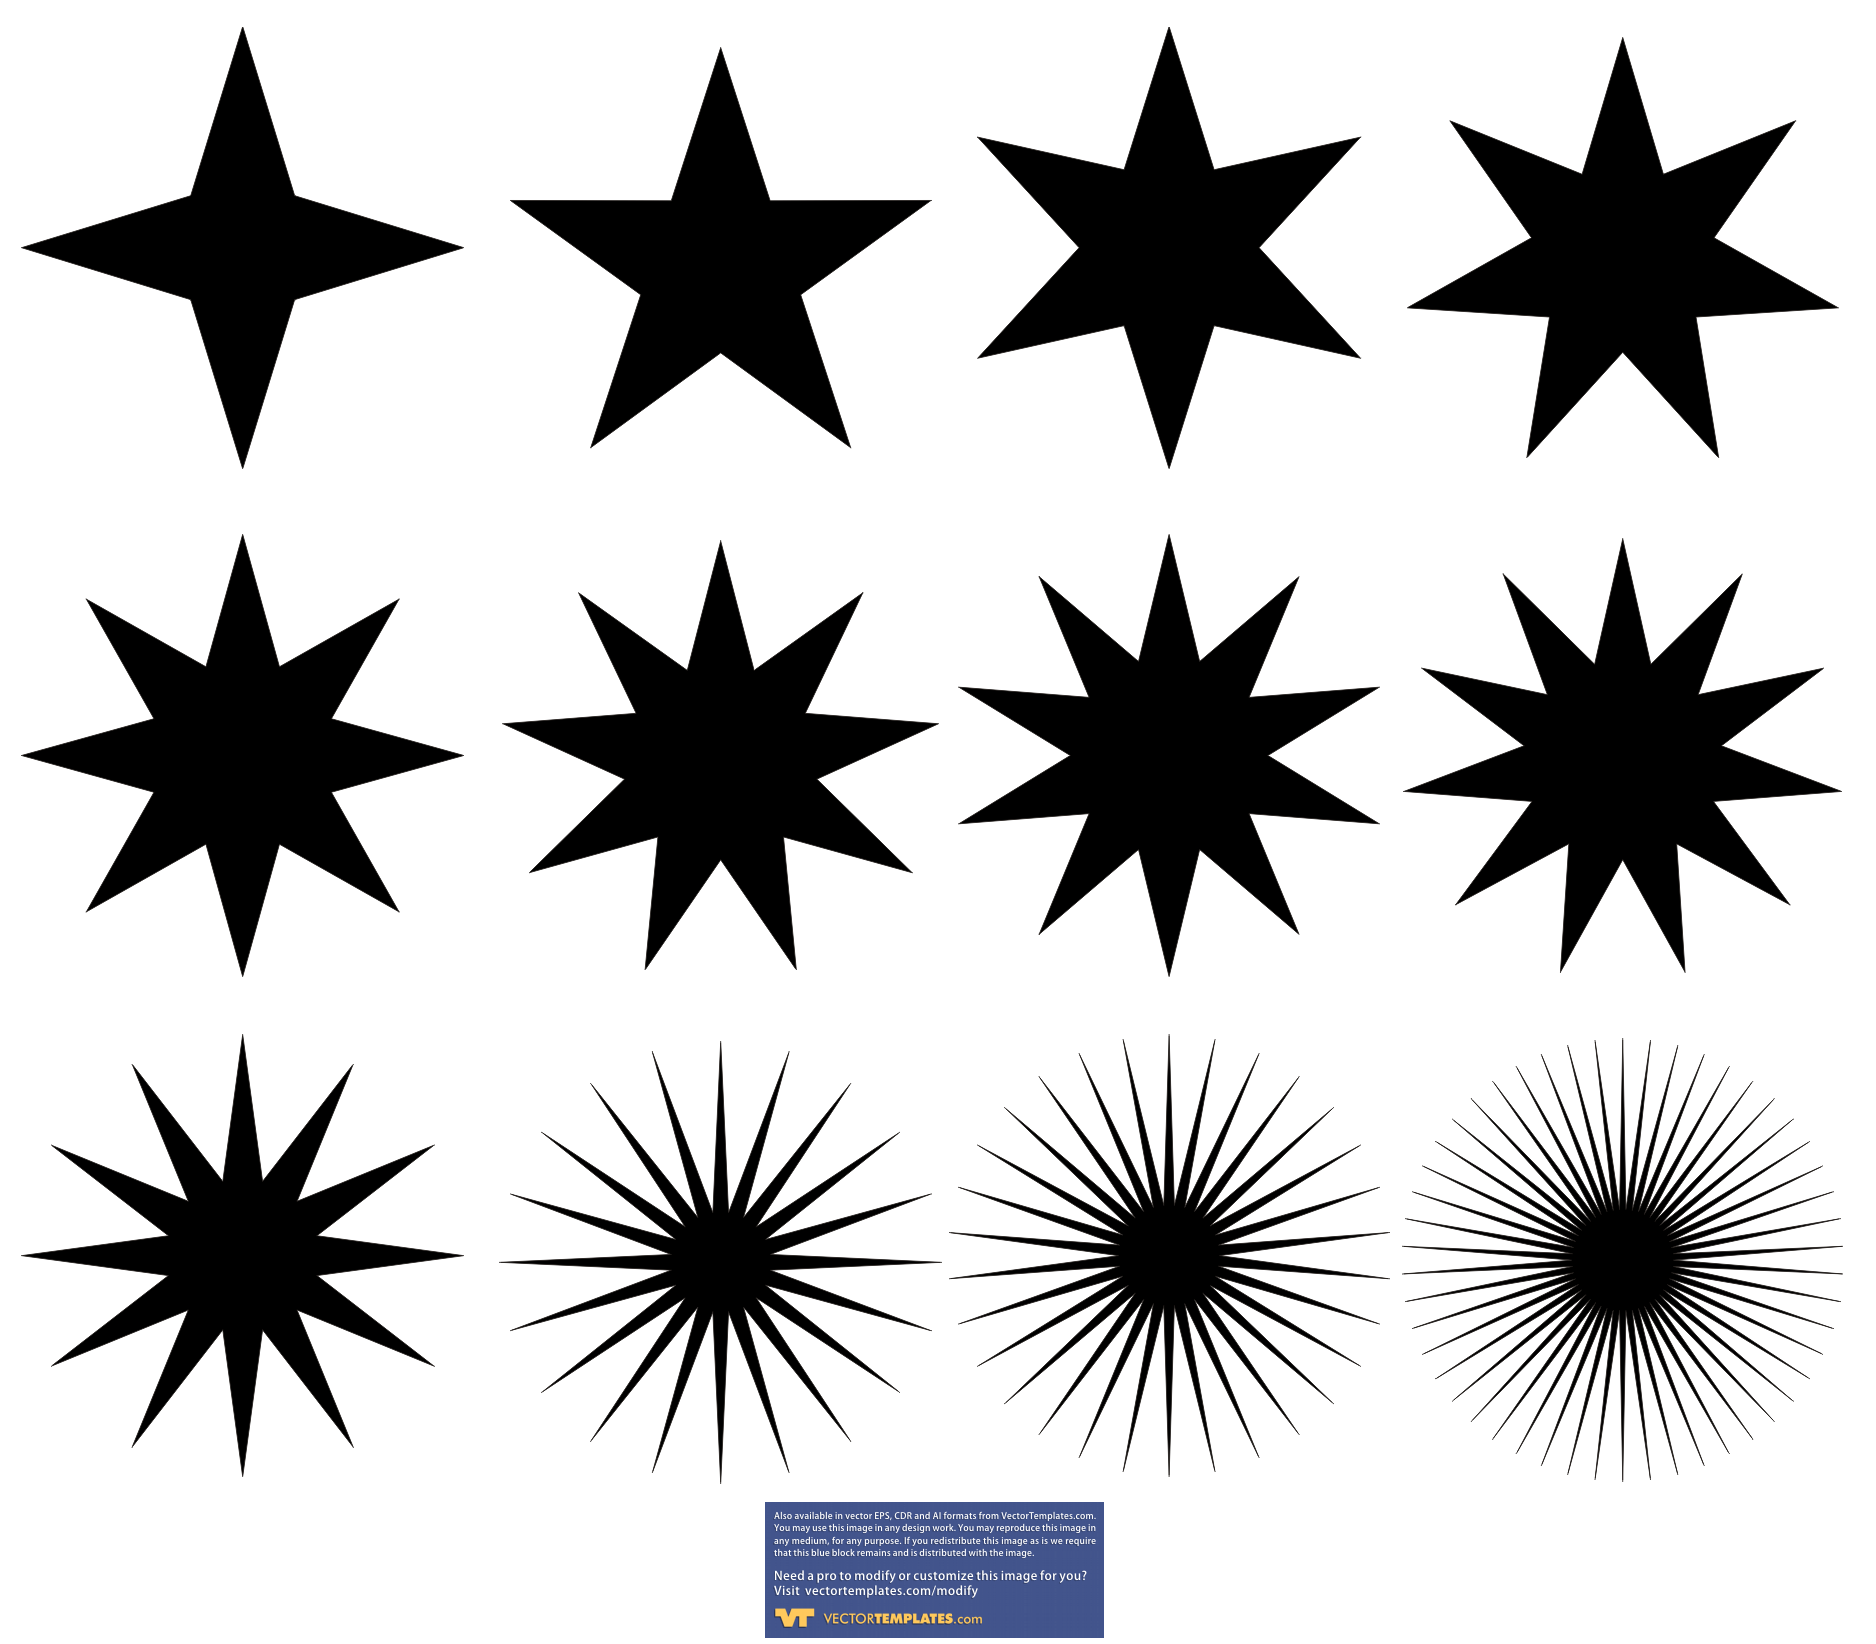 Stars - Images of Stars / Star Shapes